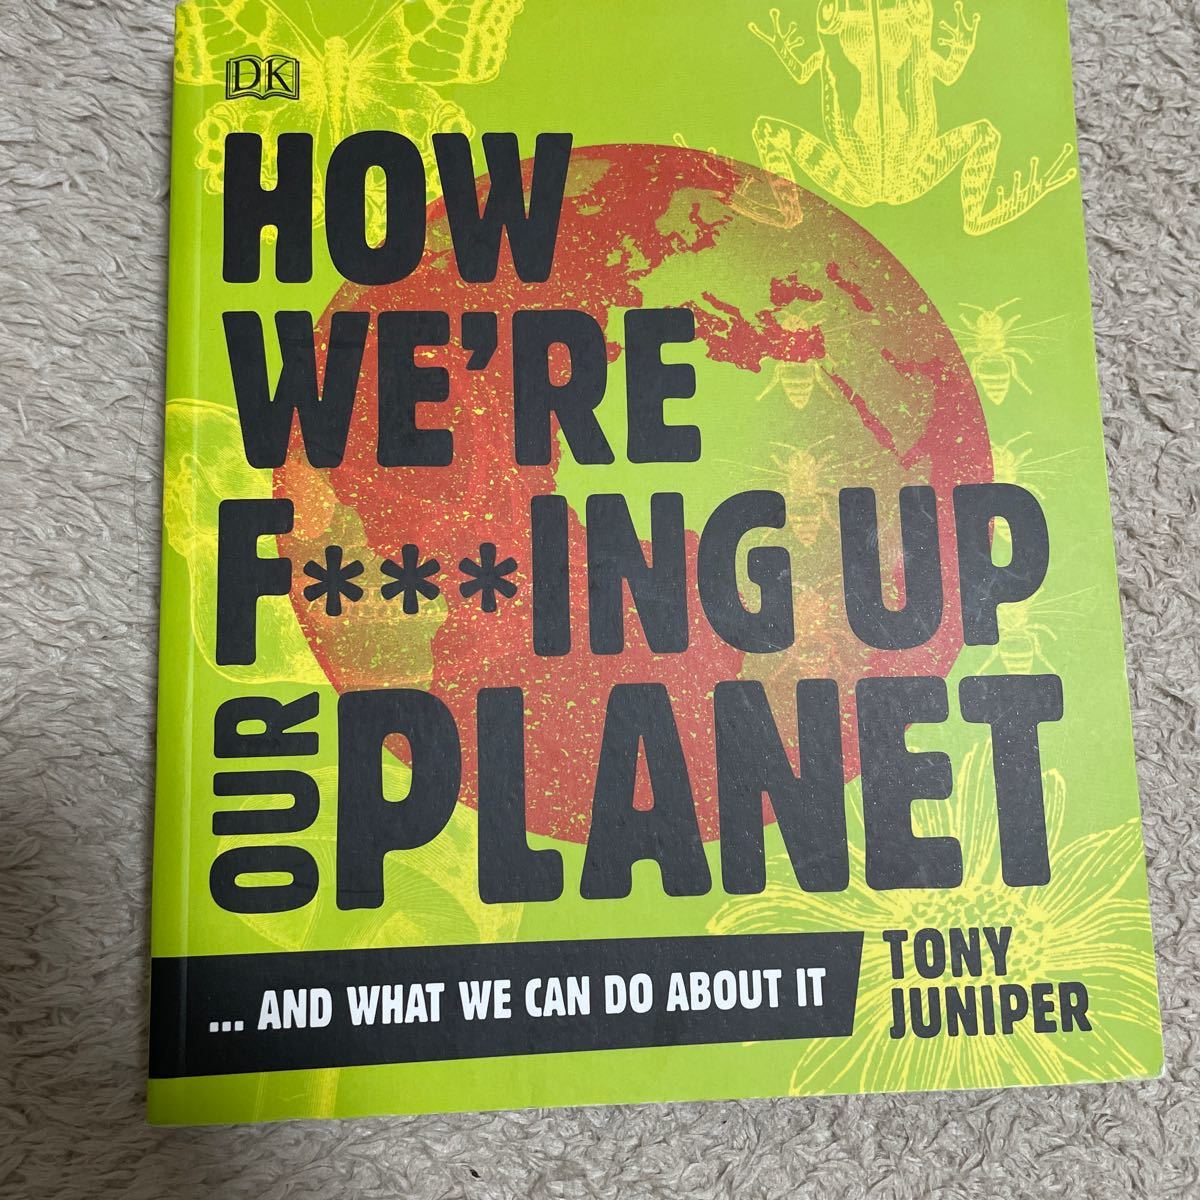 How we’re f***ing up our planet Tony Juniper